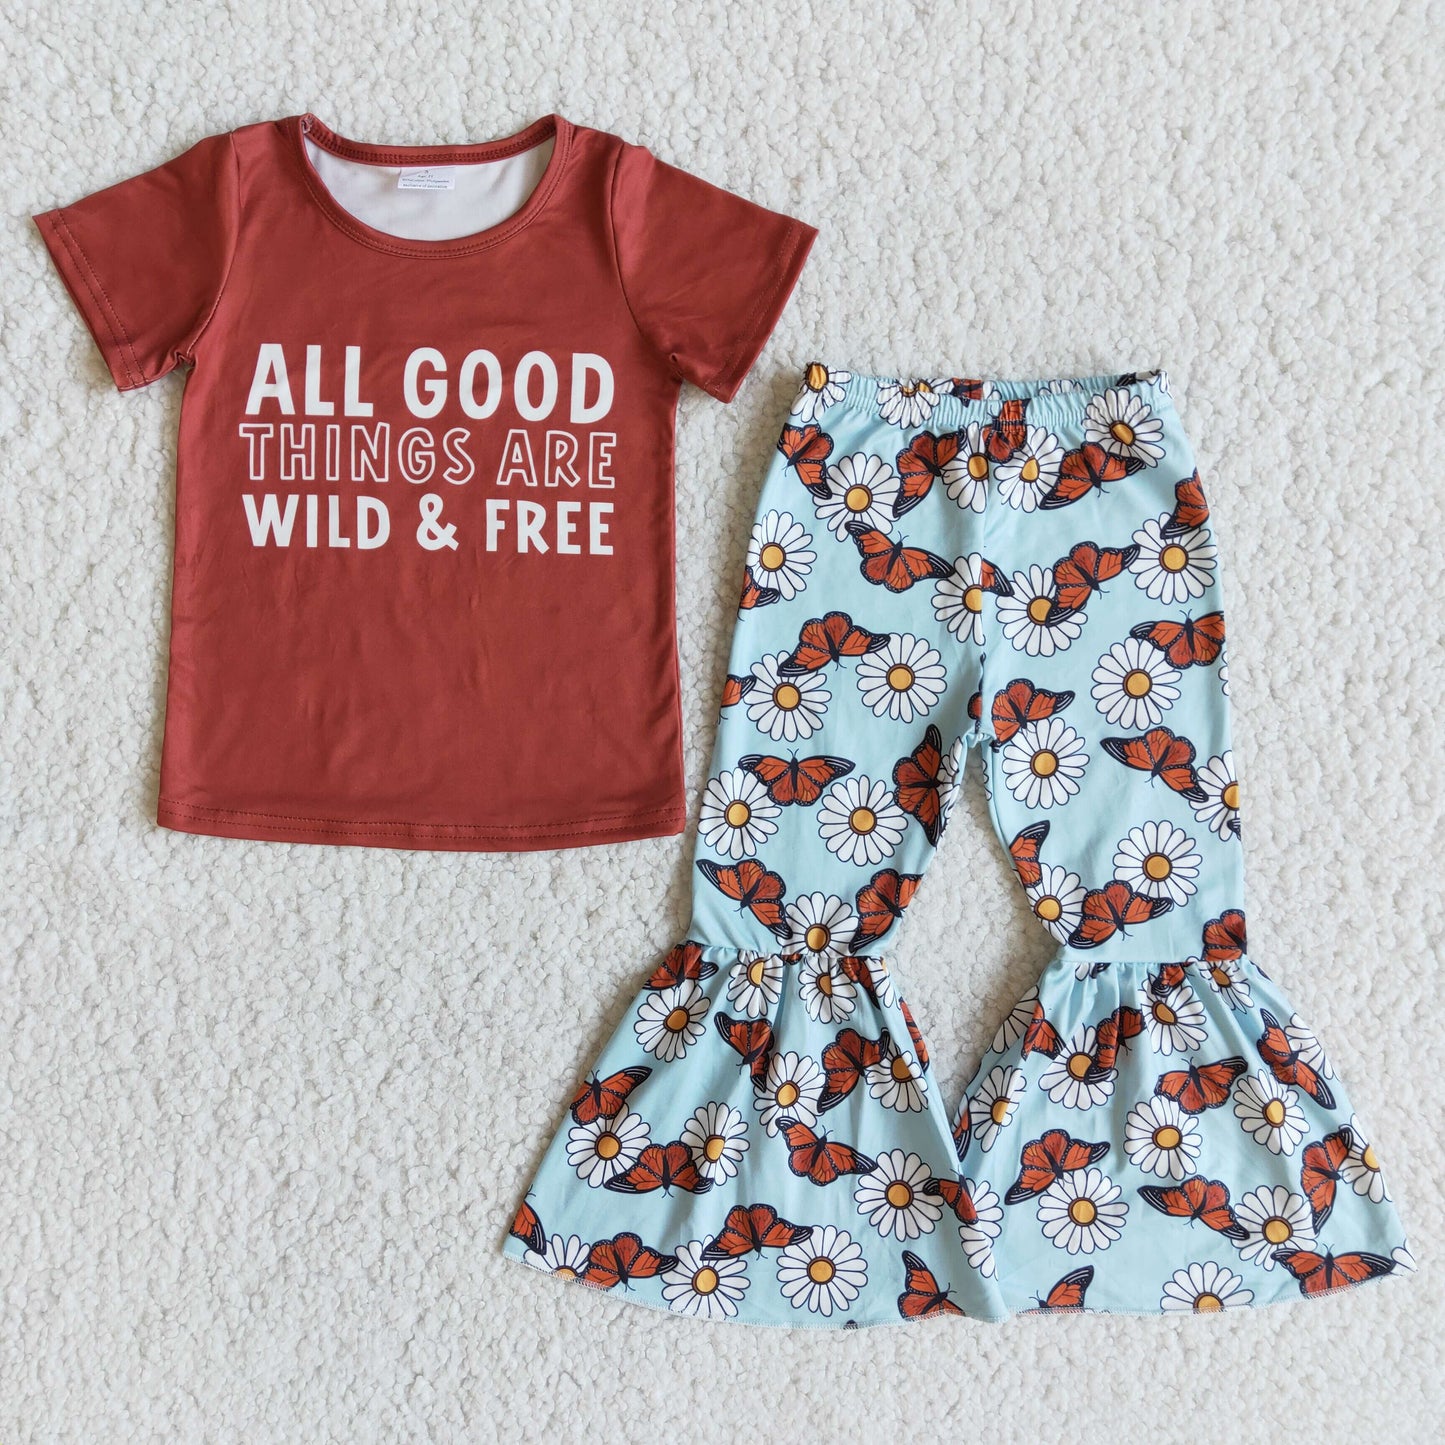 All good things are wild free floral bell bottom pants set girls boutique clothing